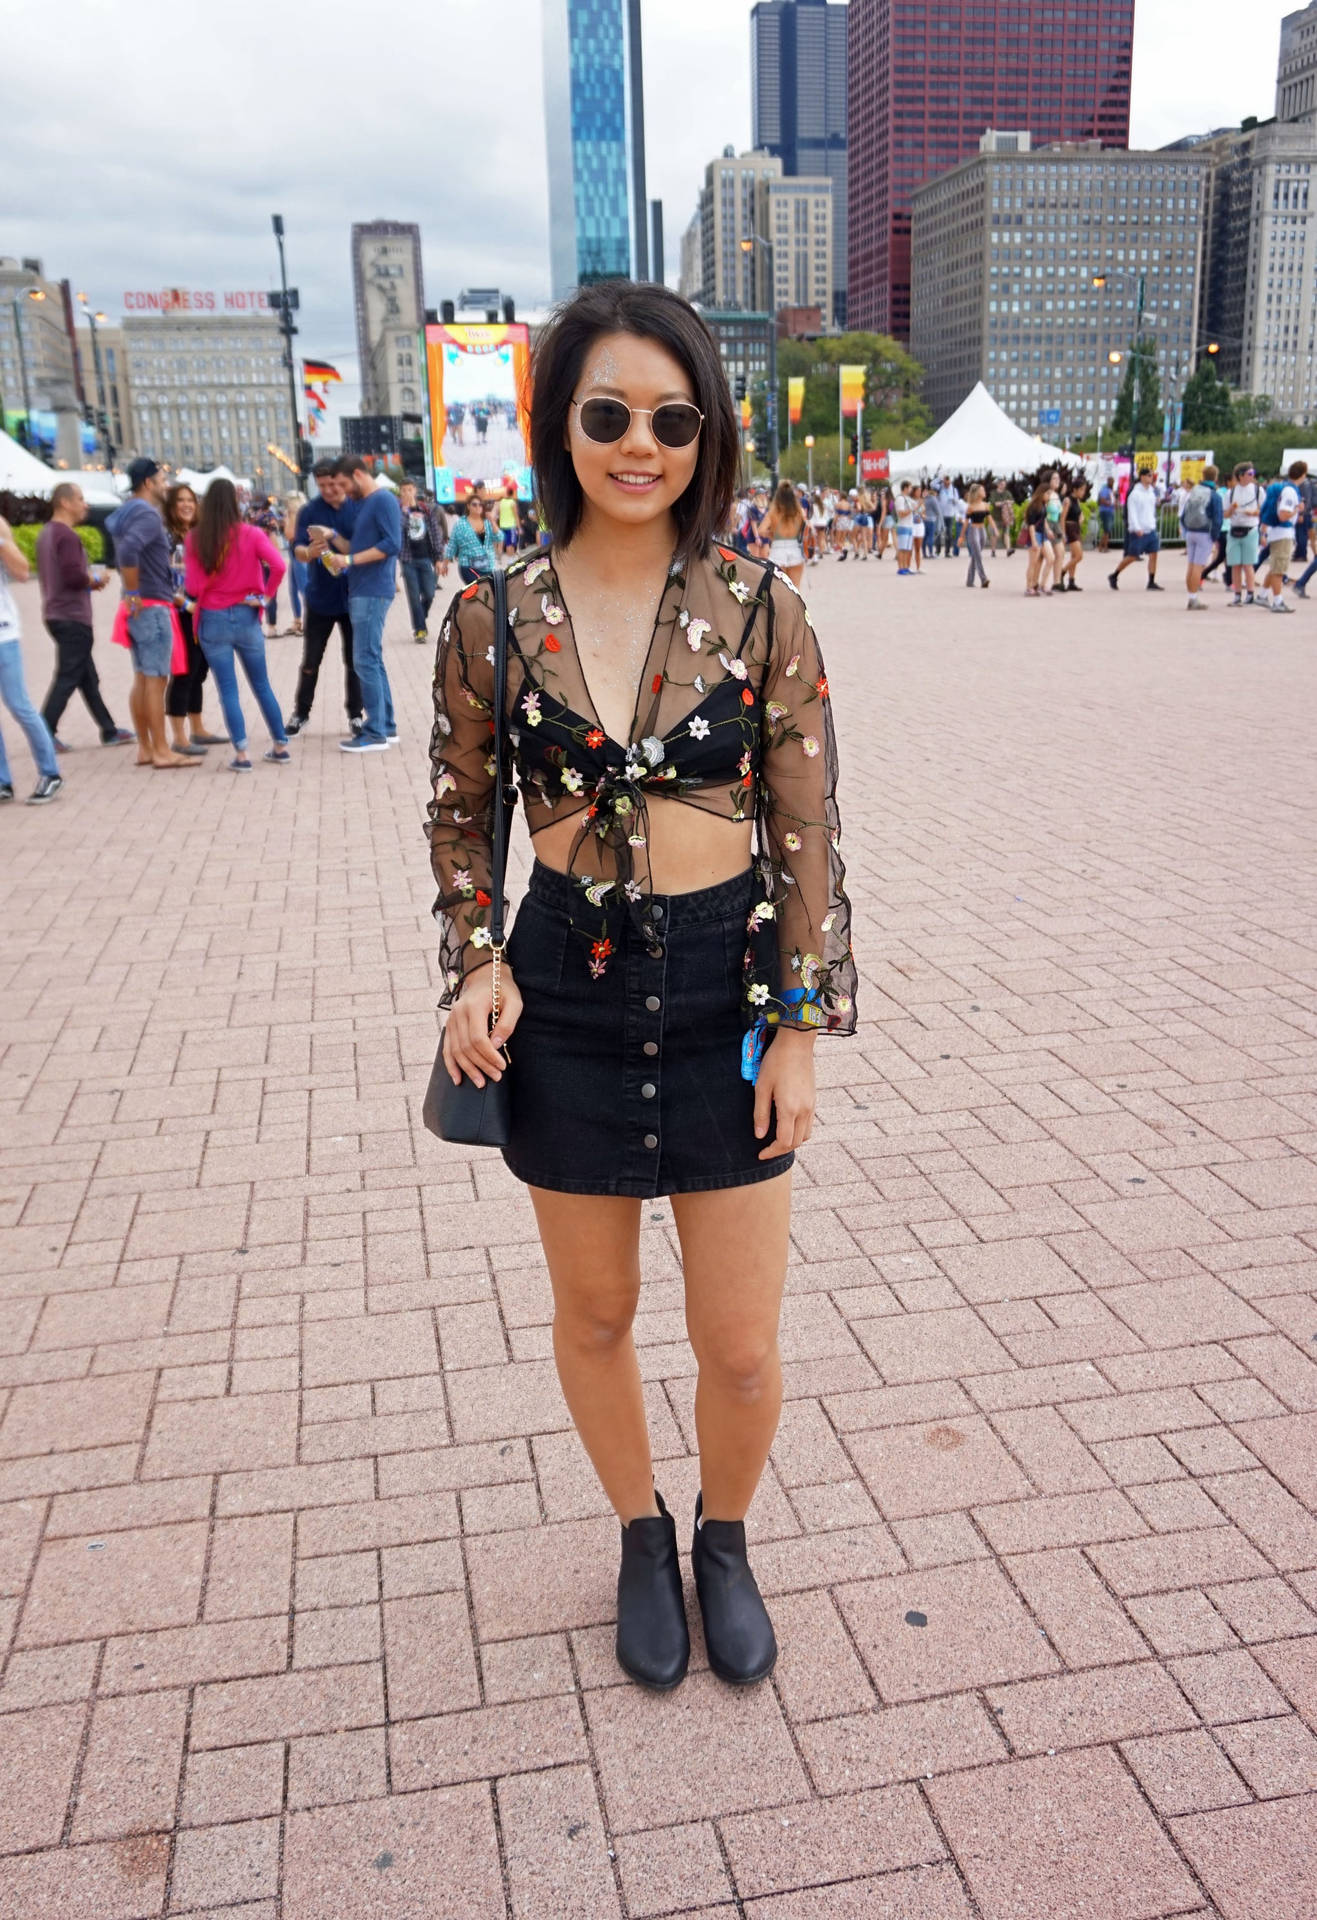 Lollapalooza Festival Outfit